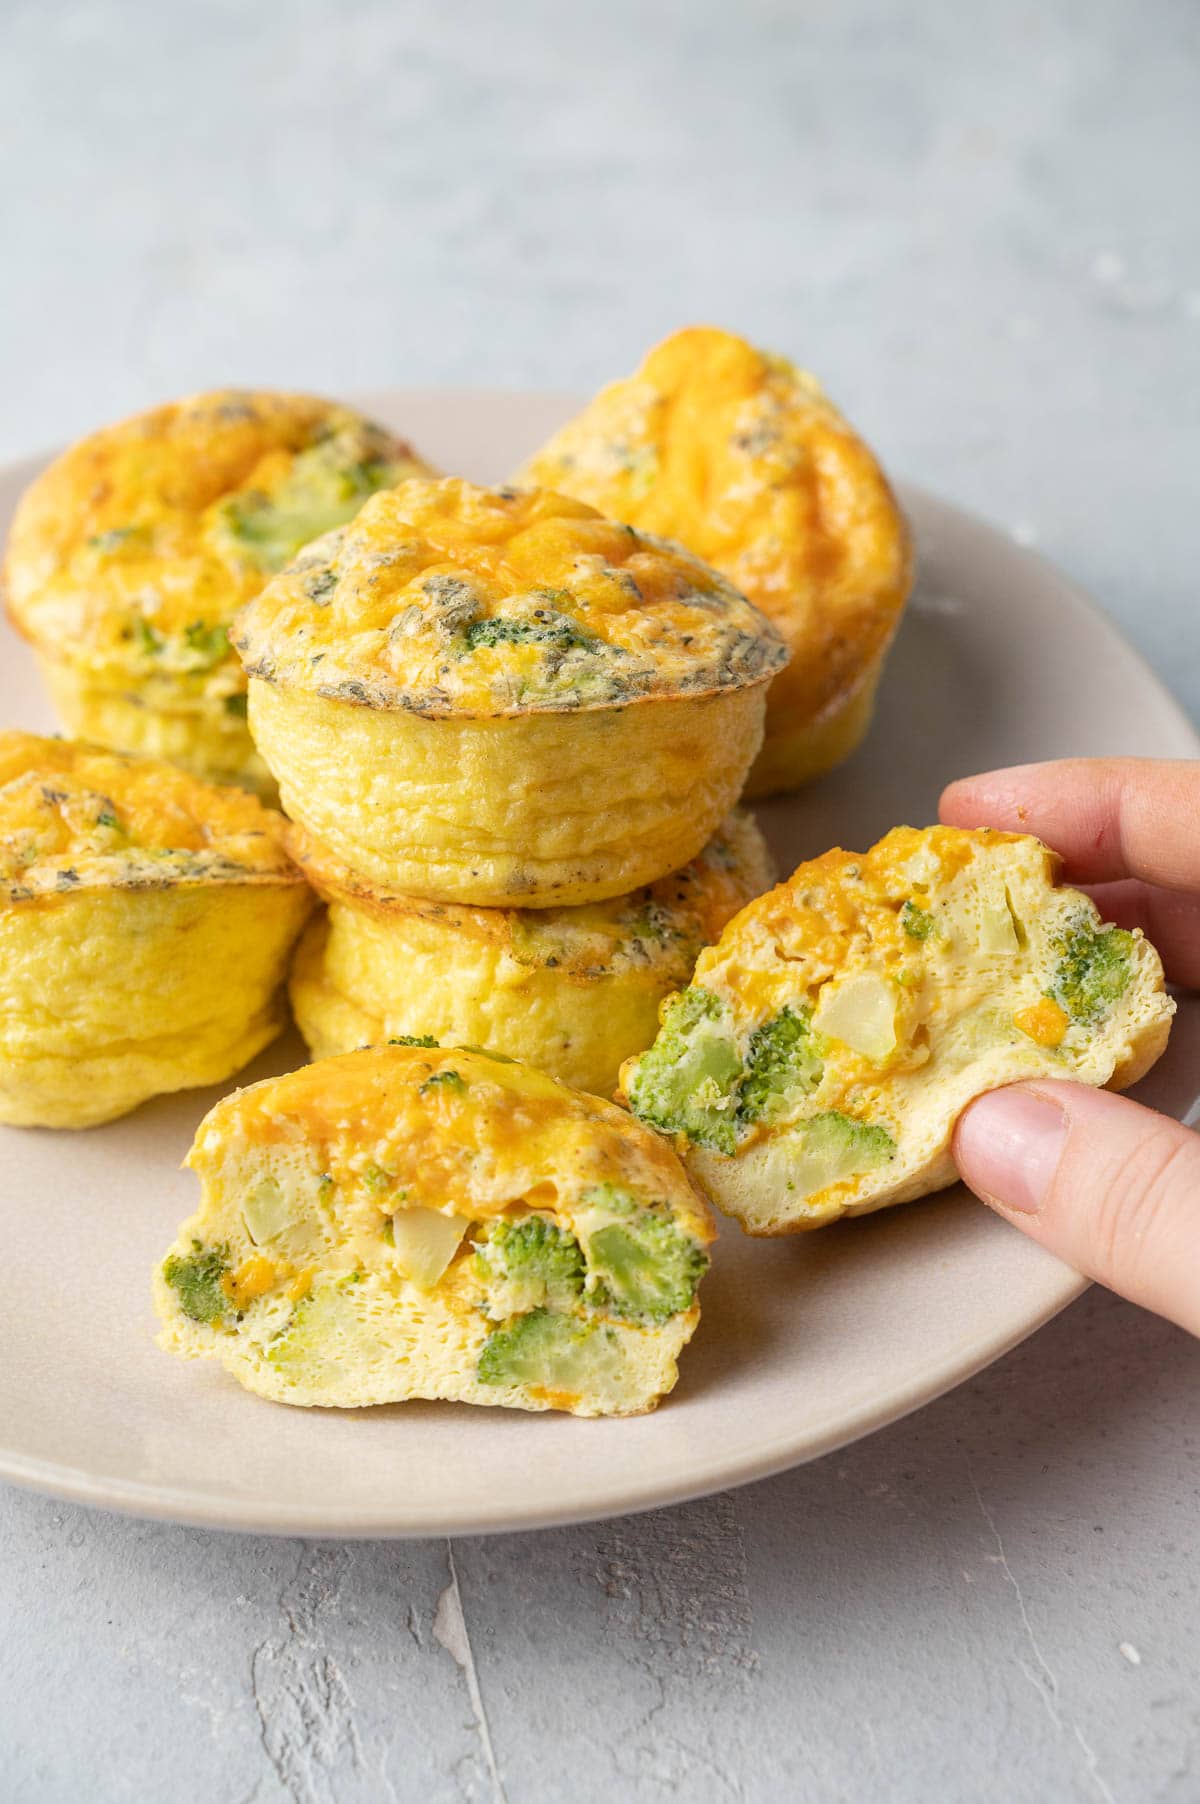 Easy Egg Muffins – A Couple Cooks